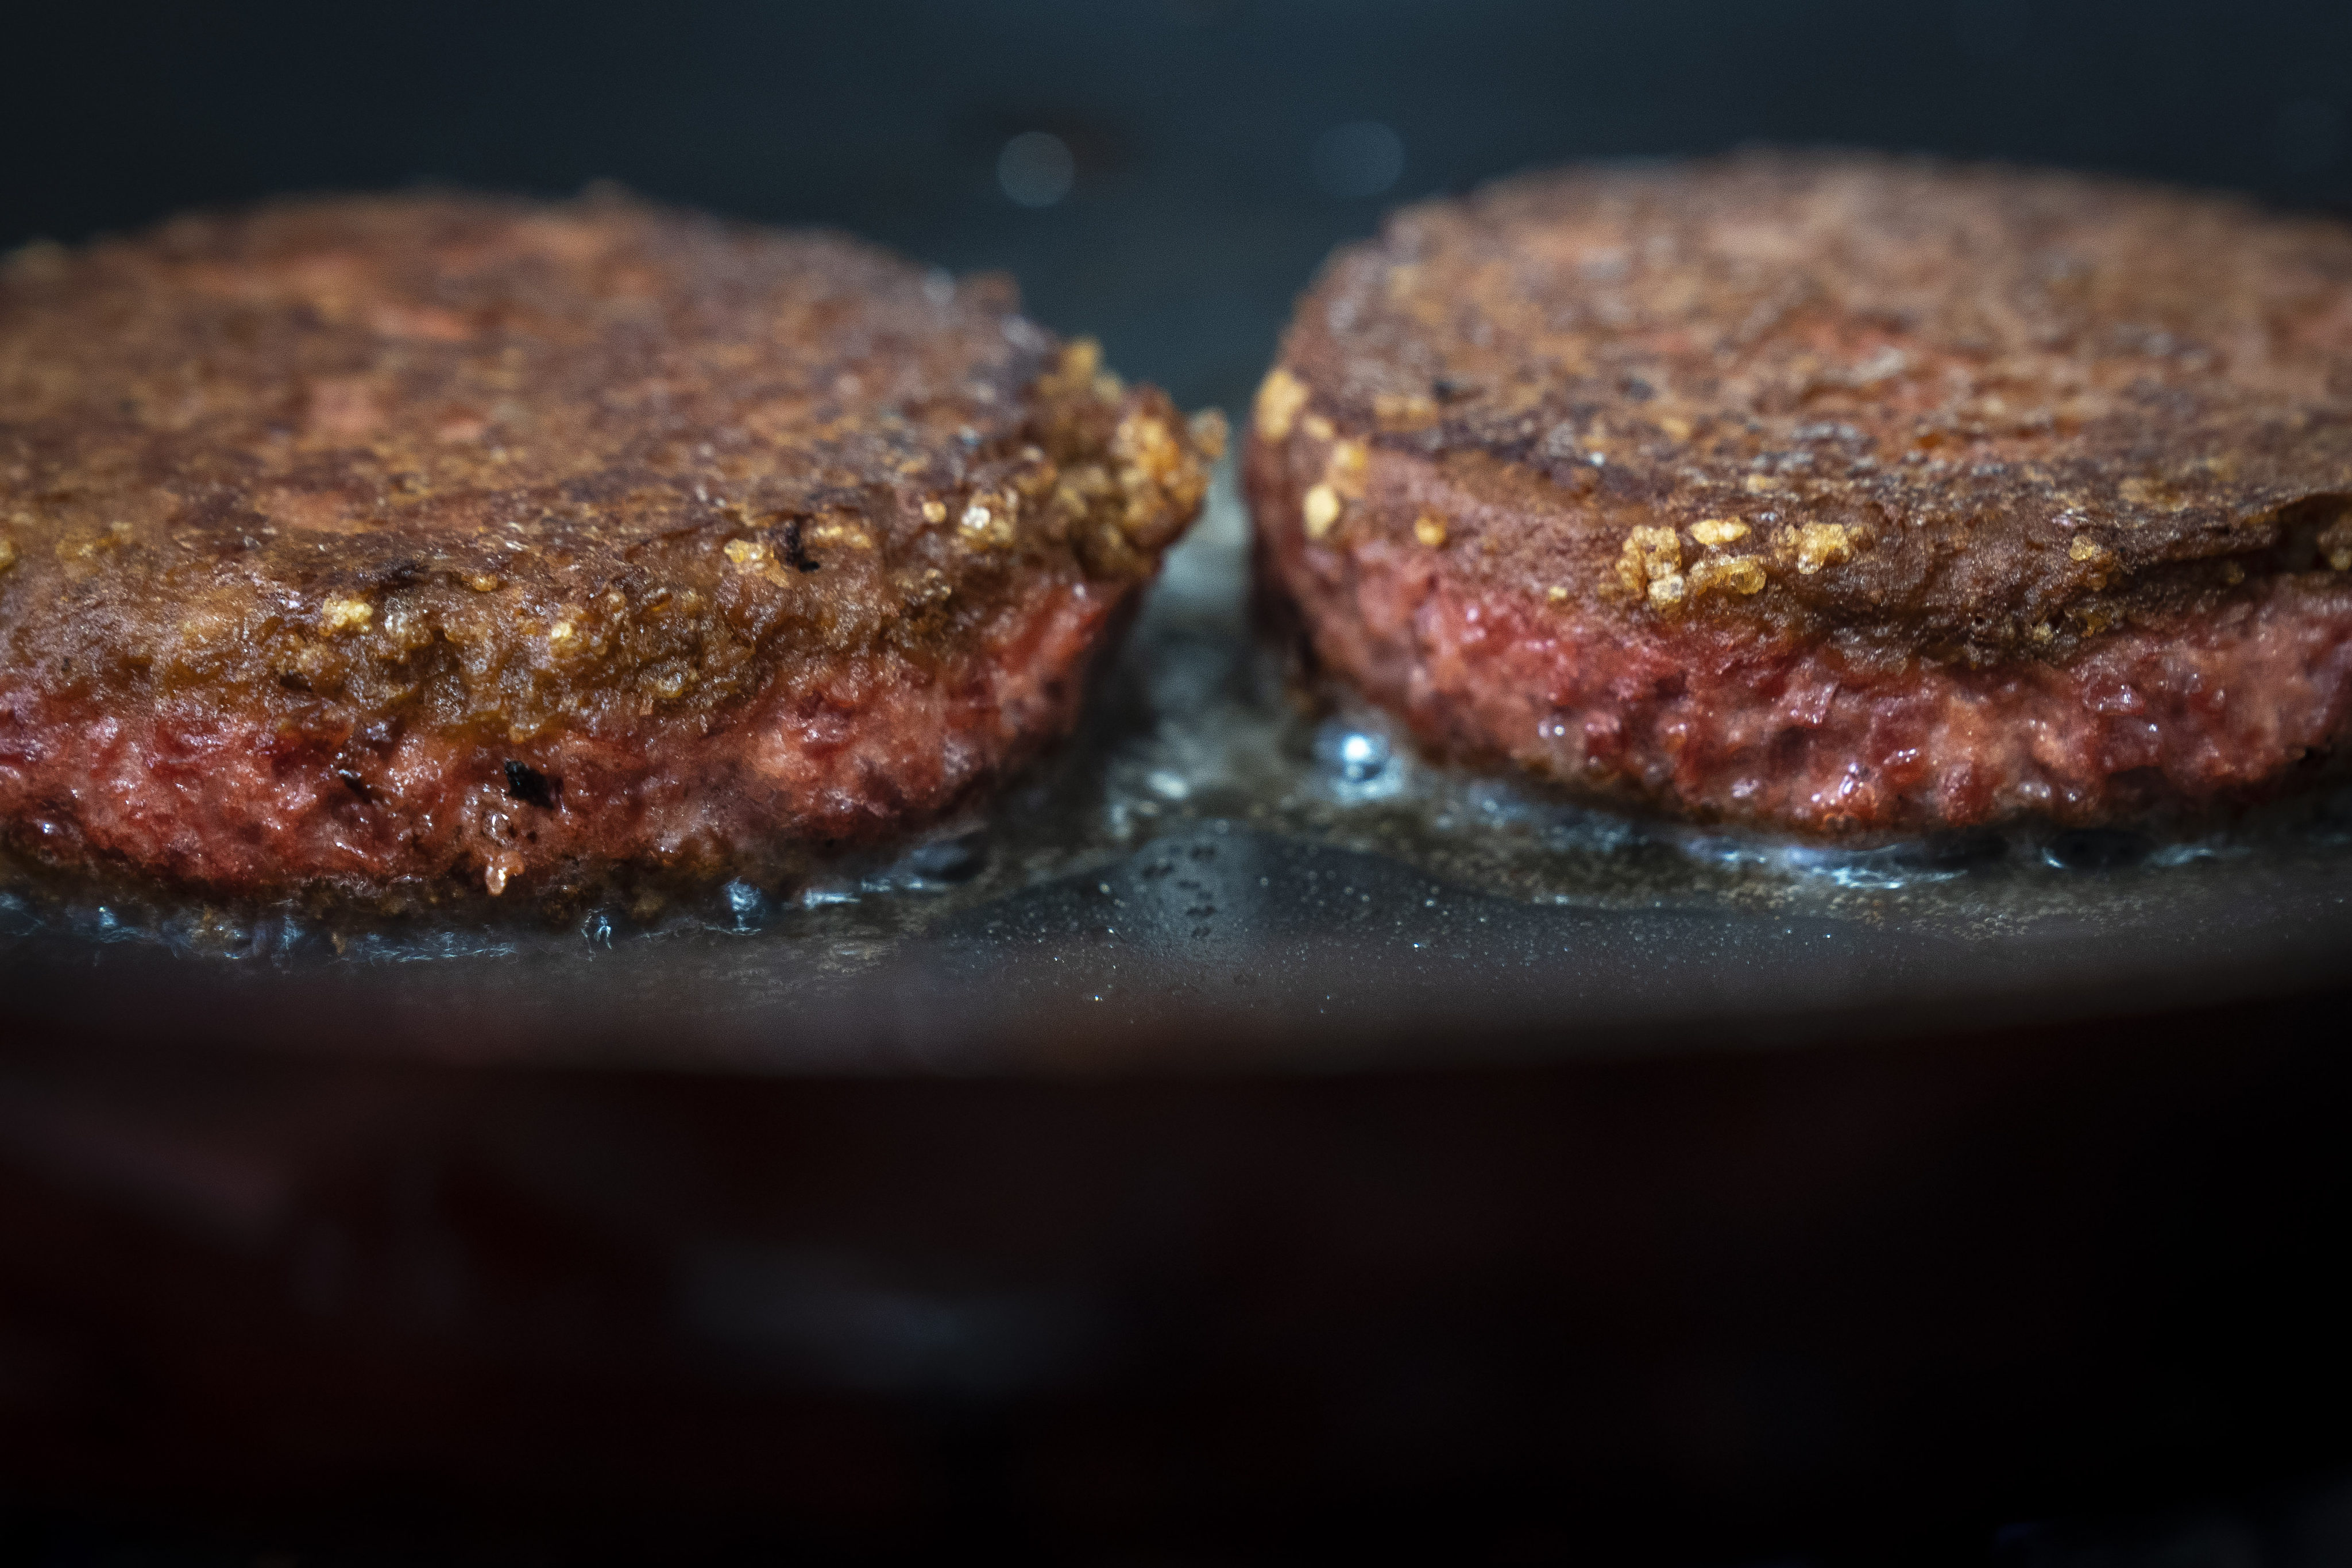 Two patties of Beyond Meat cook in a skillet. Photo: Getty Images